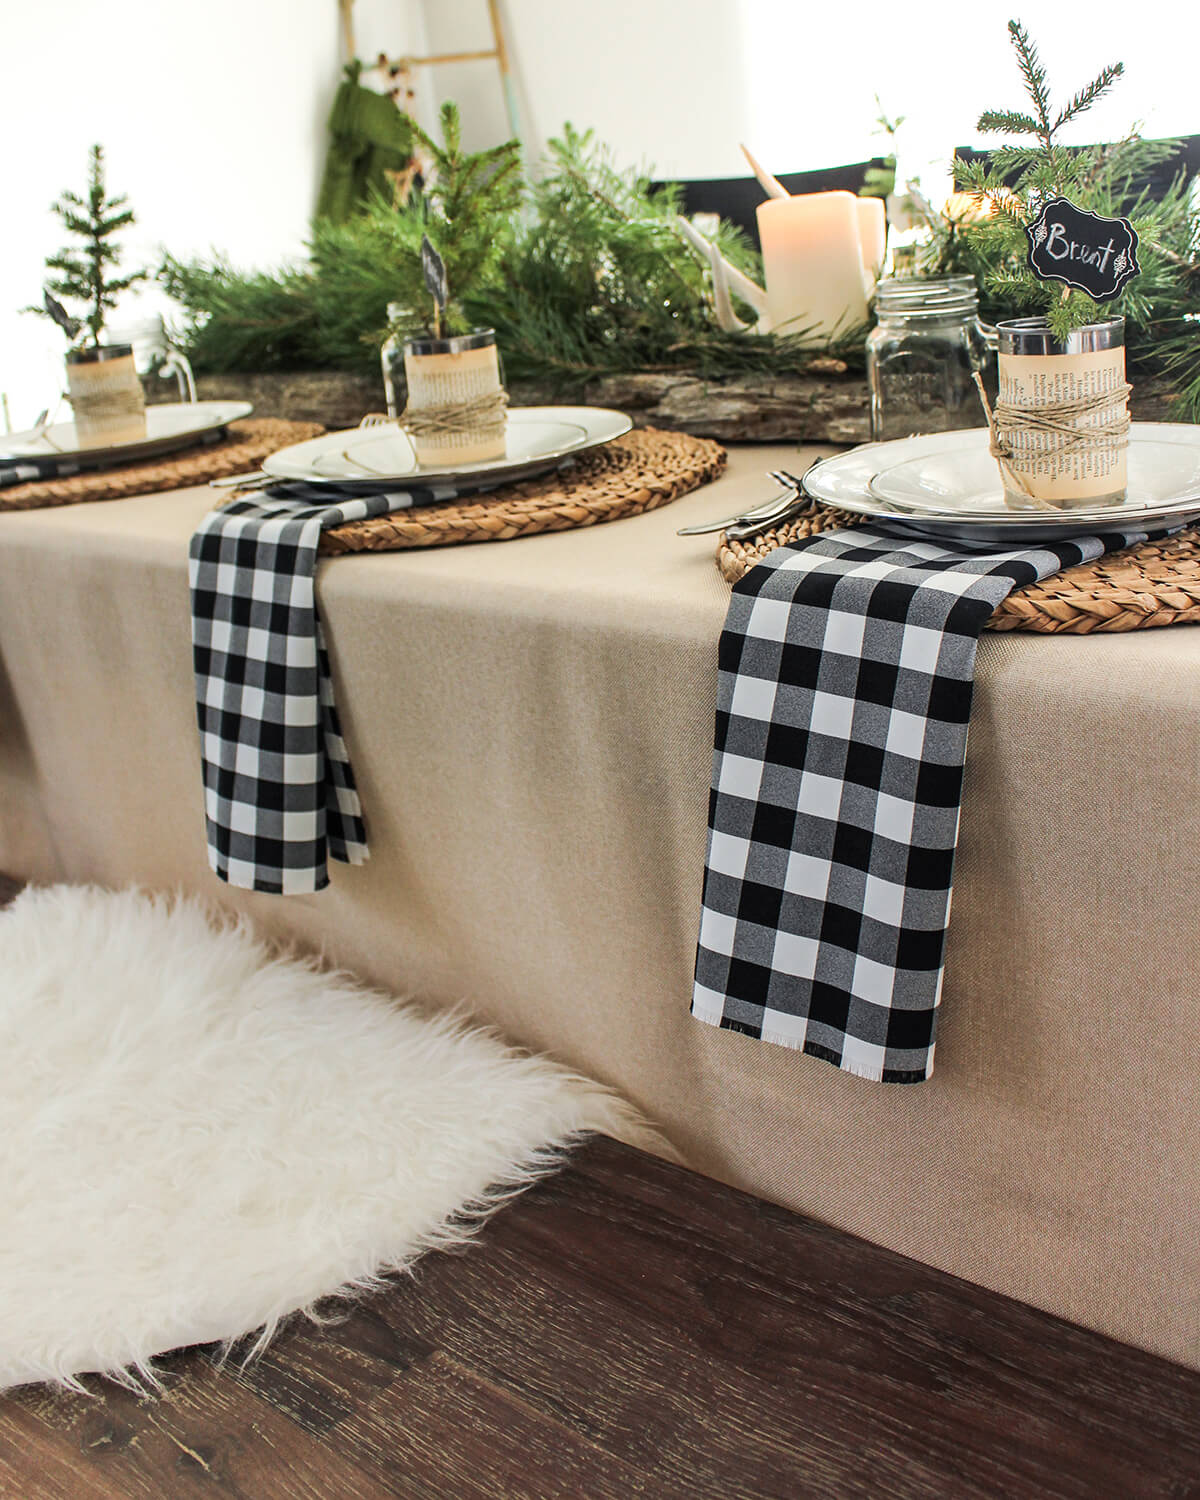 Black and White Gingham Add to a Rustic Setting